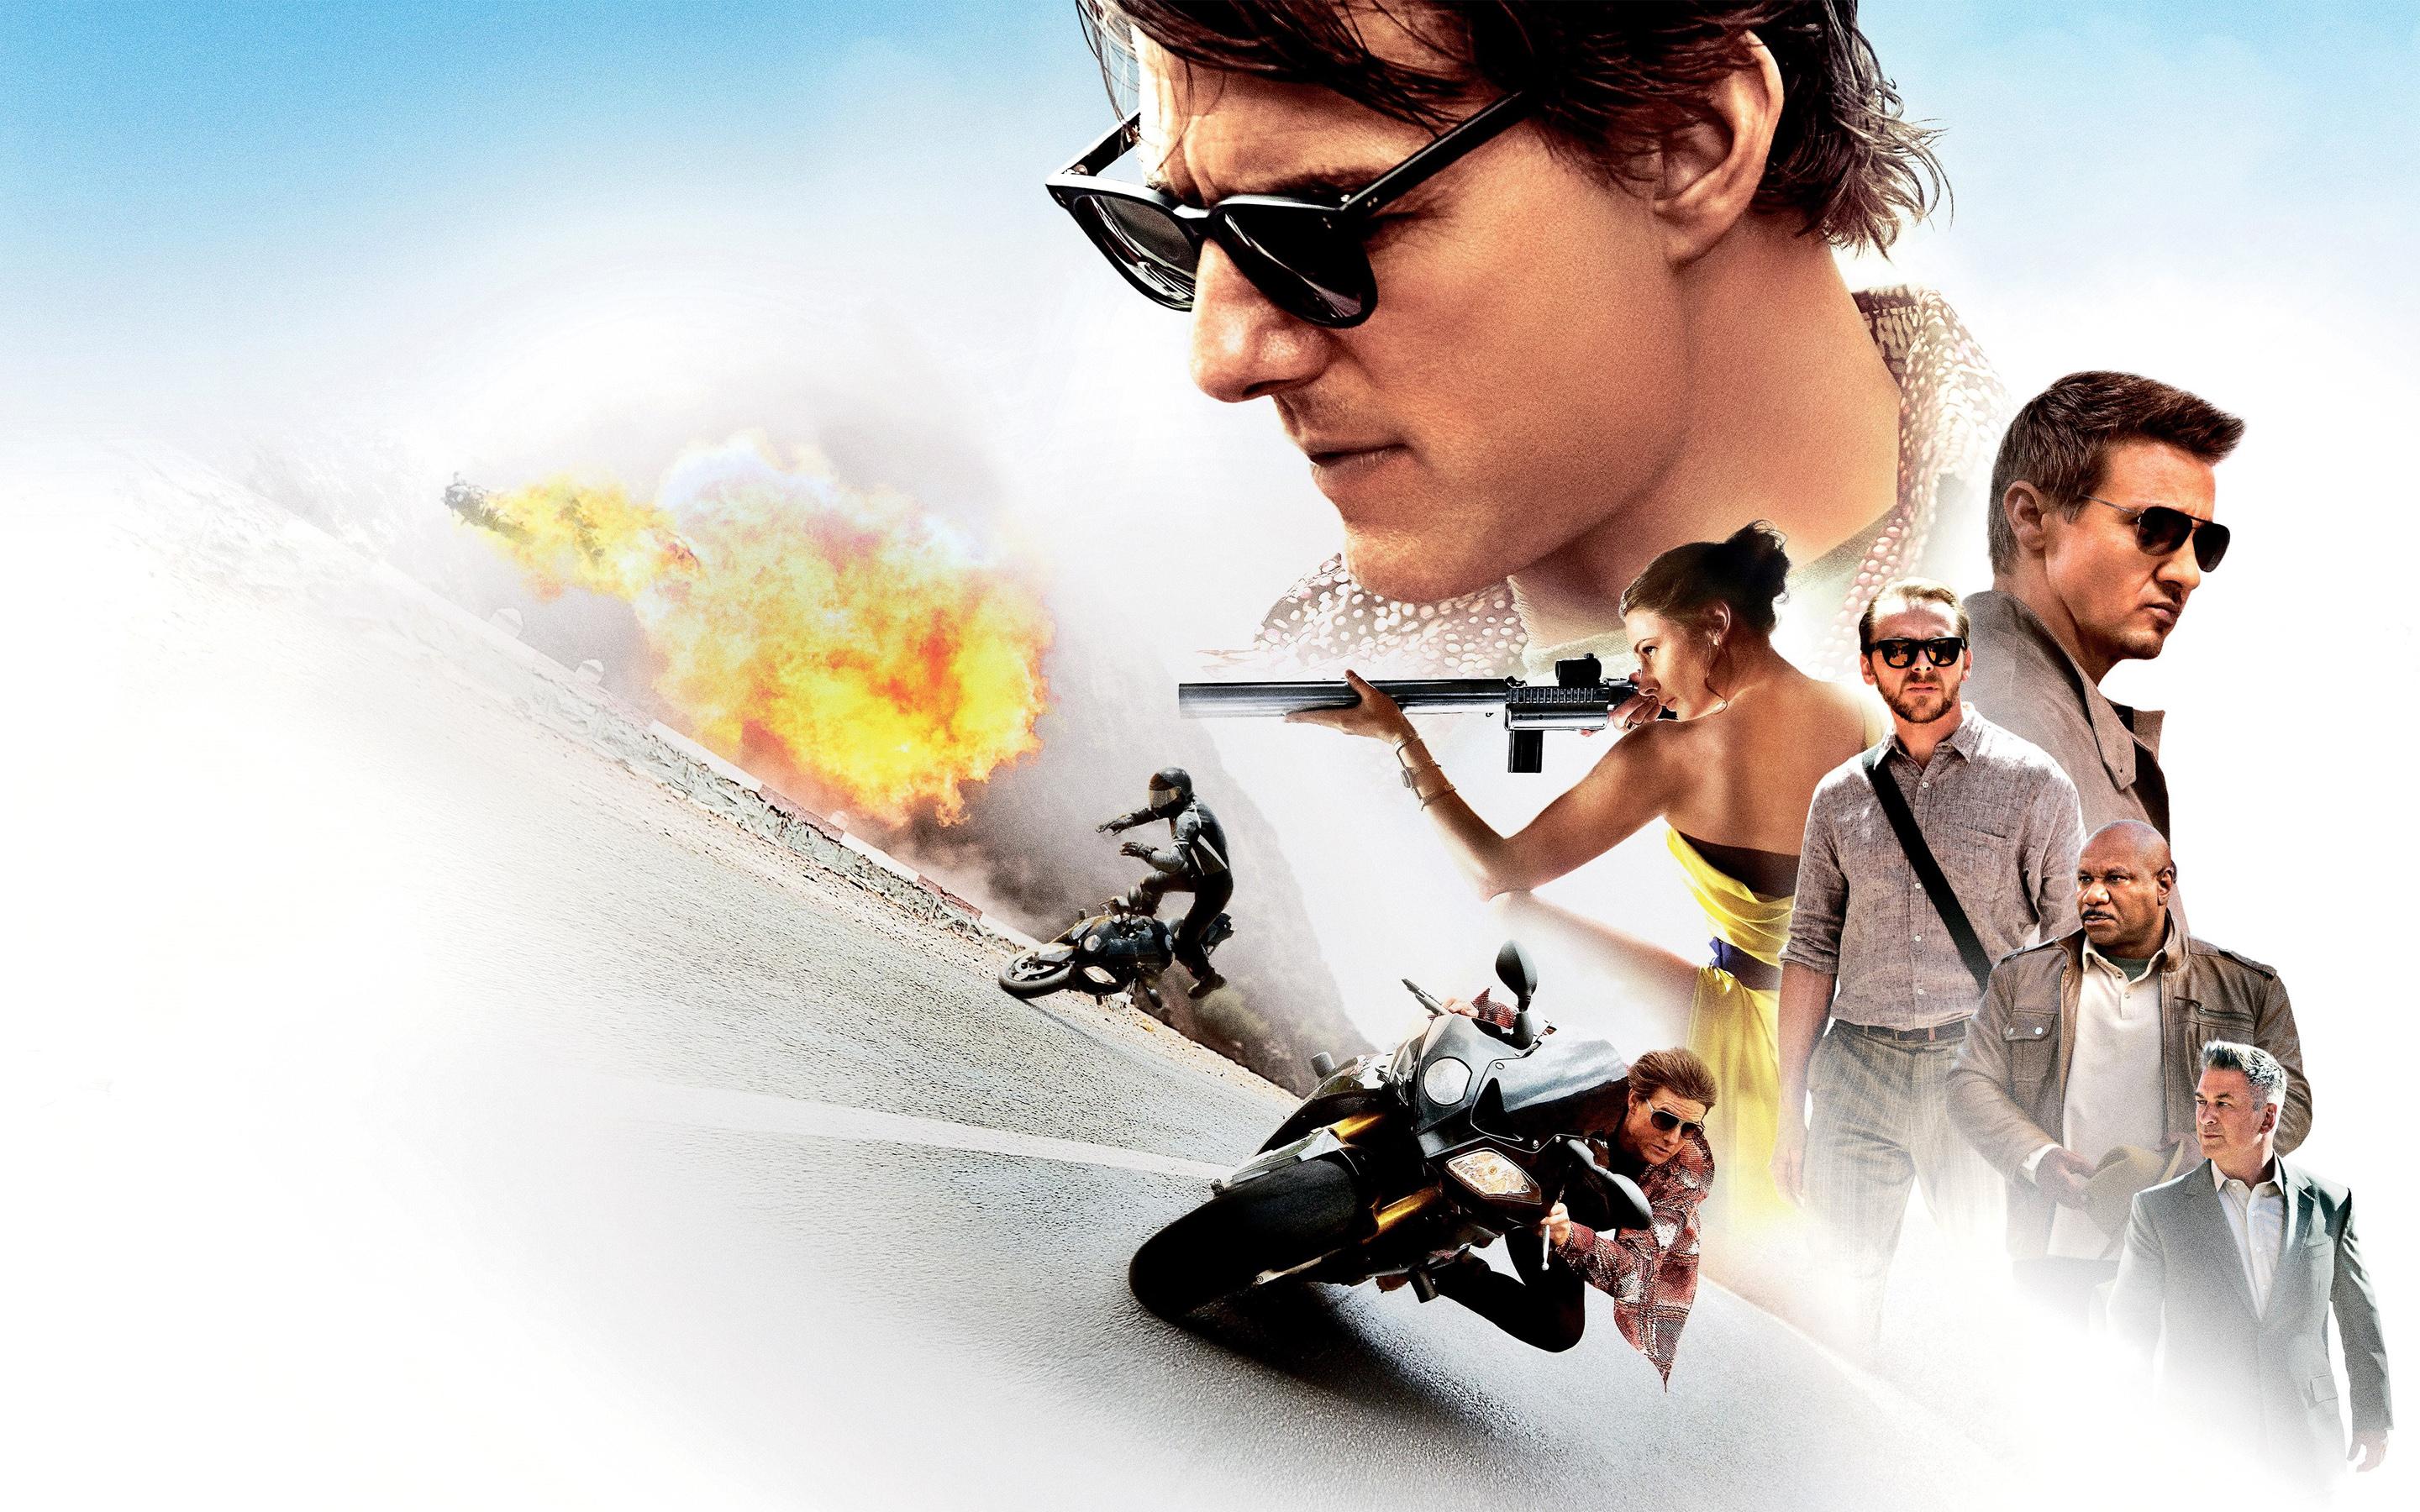 Ted Ultra 4K wallpaper of Tom Cruise's Mission Impossible Rogue Nation movie. Download for your 4K TV